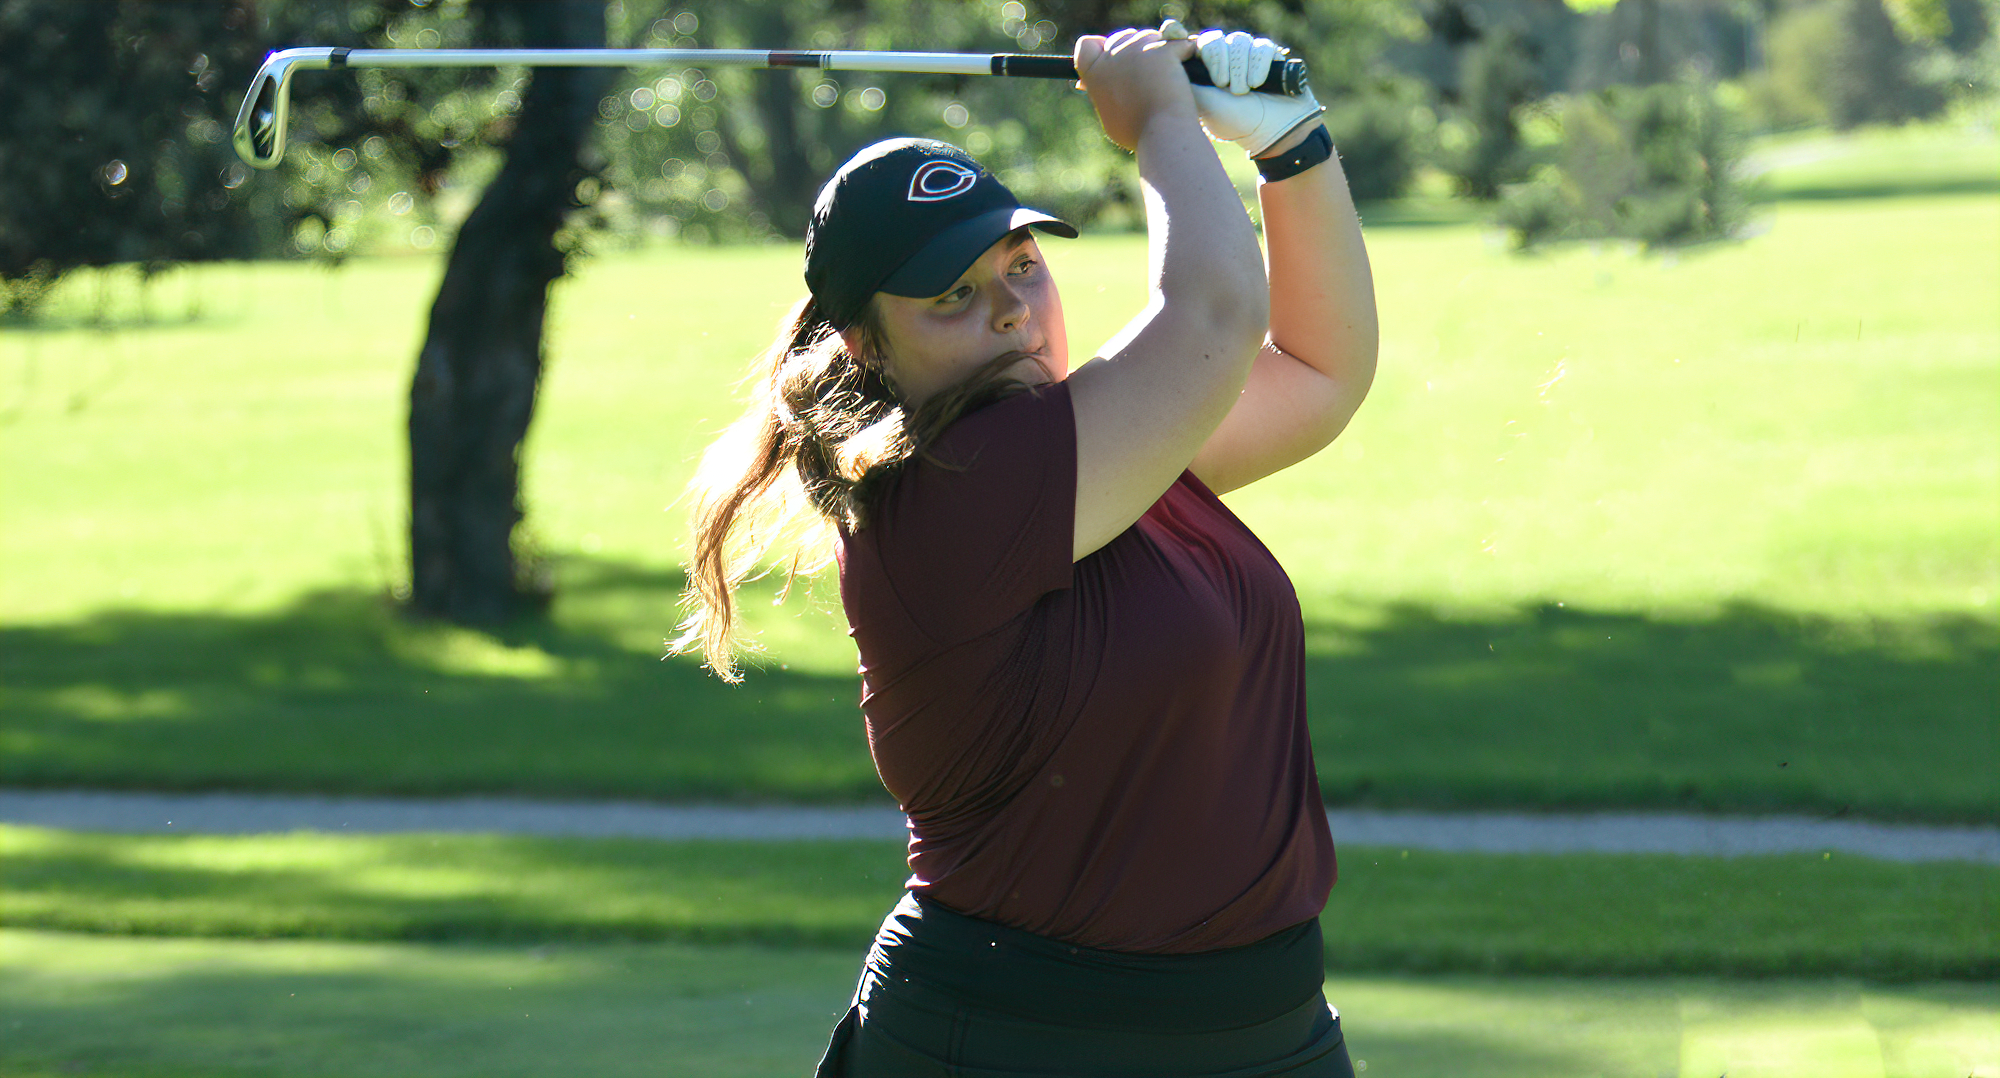 Senior Abbey Frauenholtz led Concordia at the CSB Invite as she posted a pair of scores in the 80s and finished with a total of 174 (85-89).